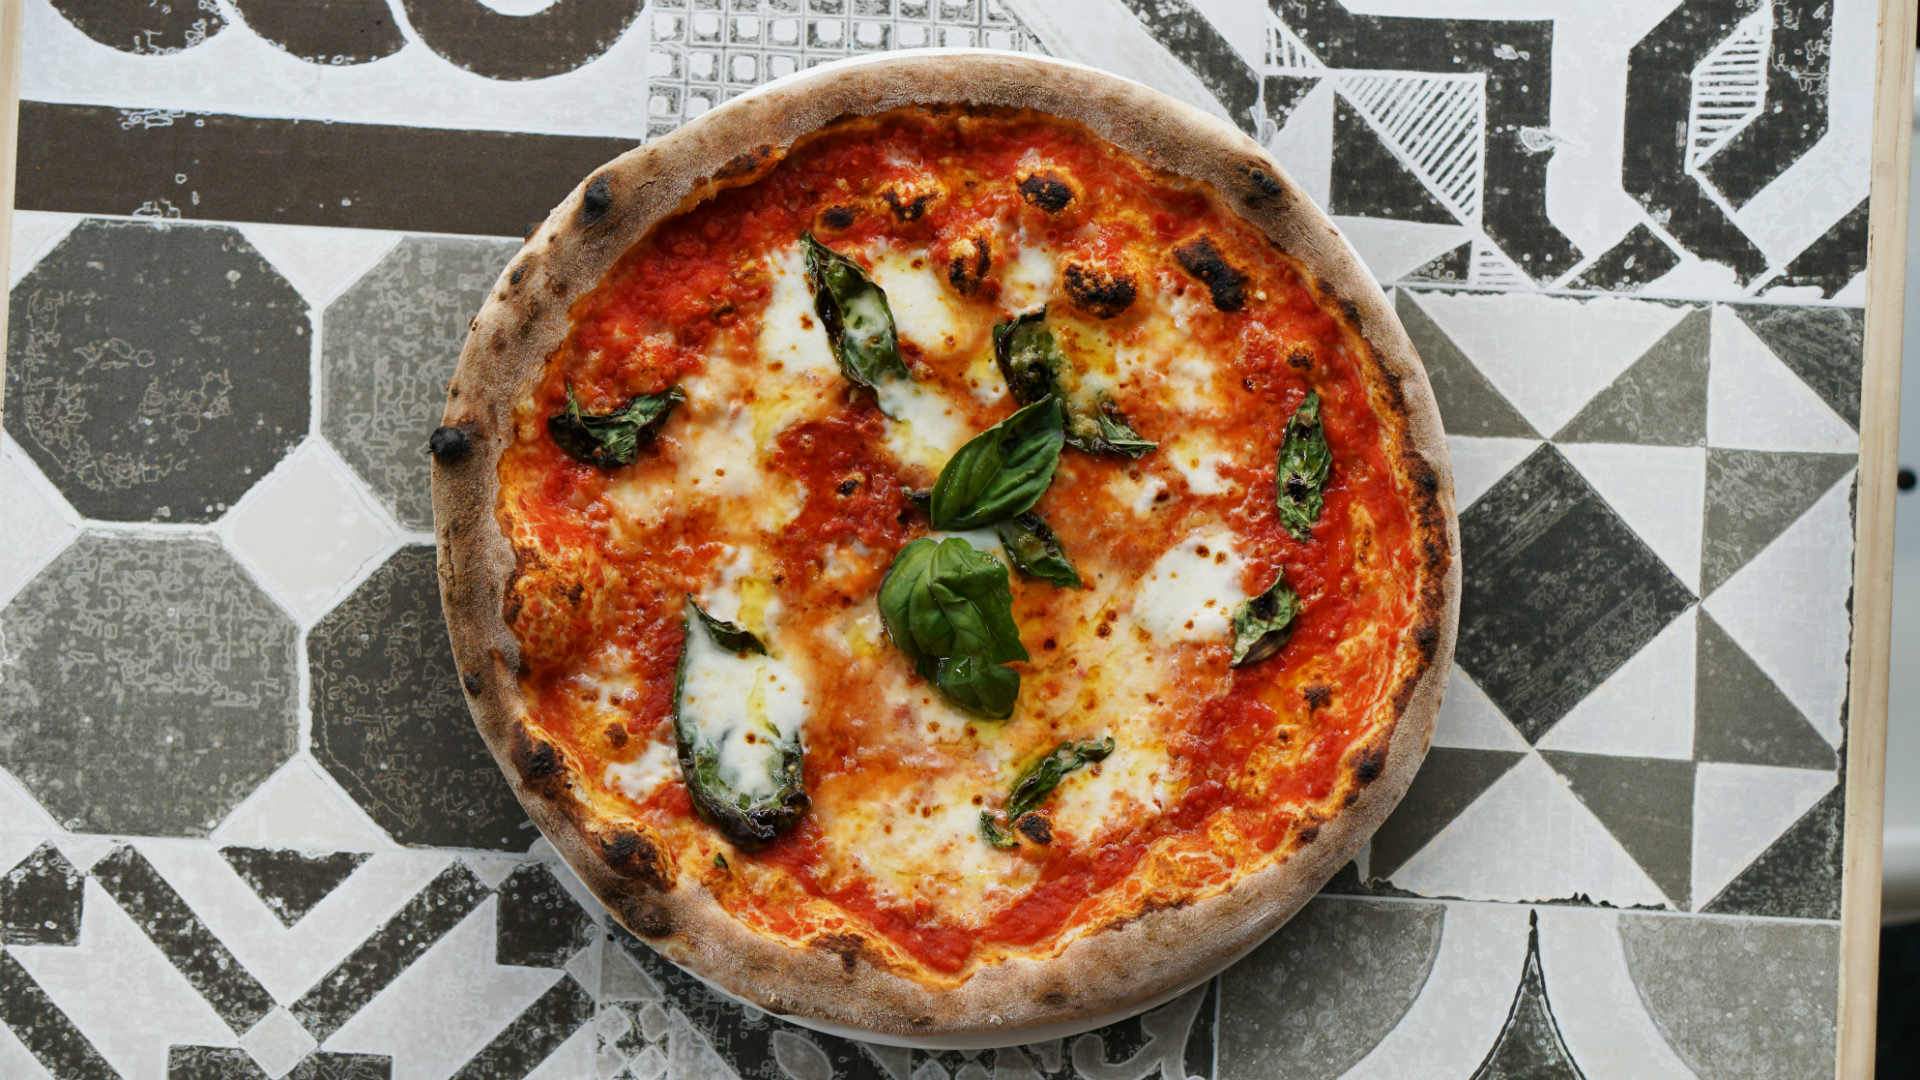 Salt Meats Cheese Mosman Is Reopening as a Pizzeria